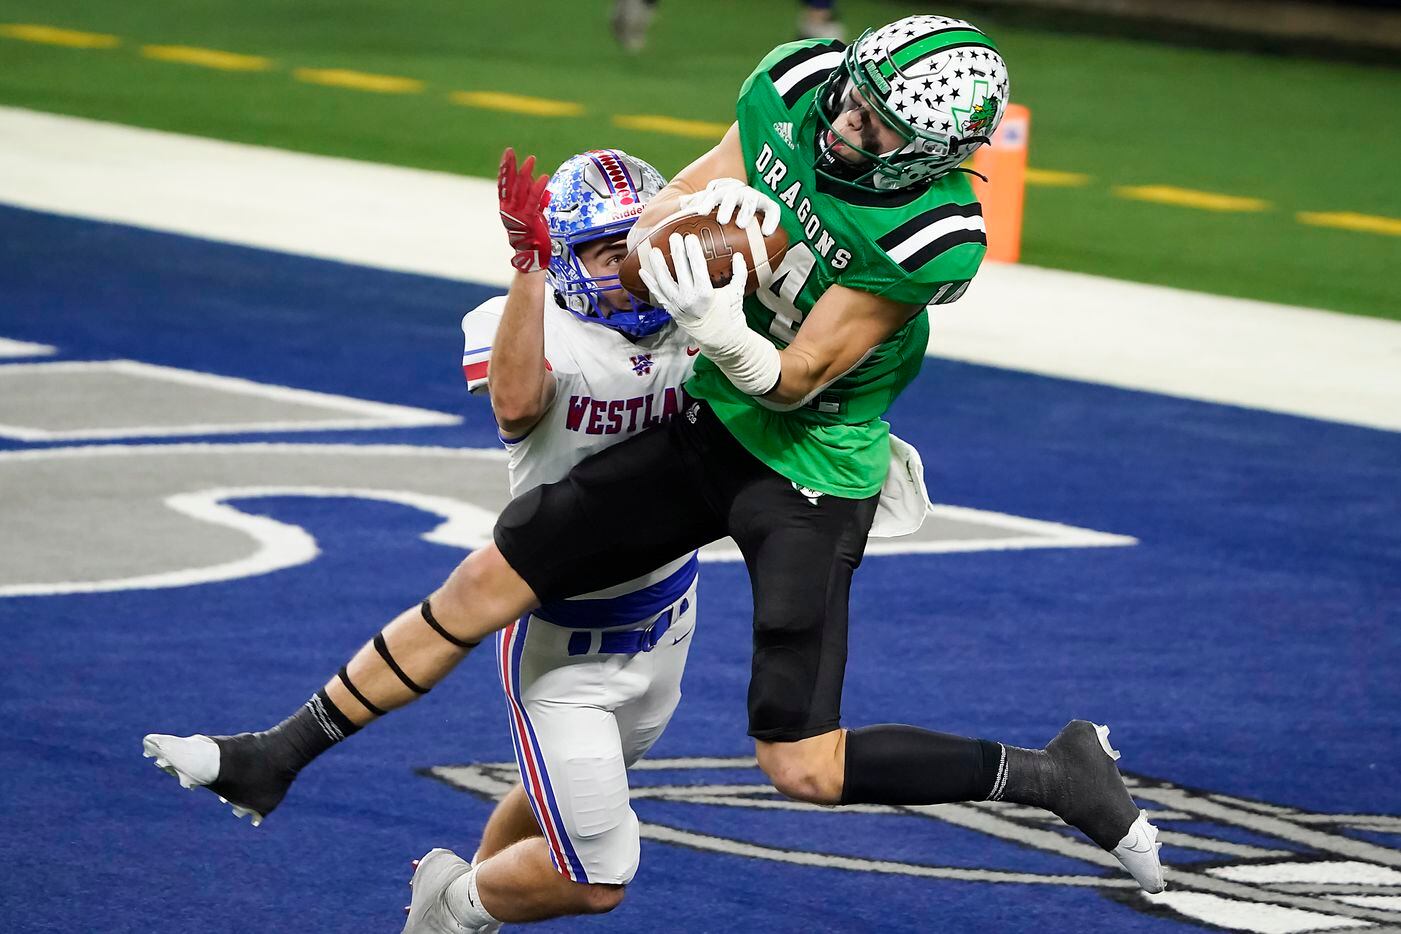 Southlake Carroll wide receiver Brady Boyd (14) catches a 27-yard touchdown pass as Austin Westlake defensive back Jax Crockett (4) defends during the second quarter of the Class 6A Division I state football championship game at AT&T Stadium on Saturday, Jan. 16, 2021, in Arlington, Texas. (Smiley N. Pool/The Dallas Morning News)